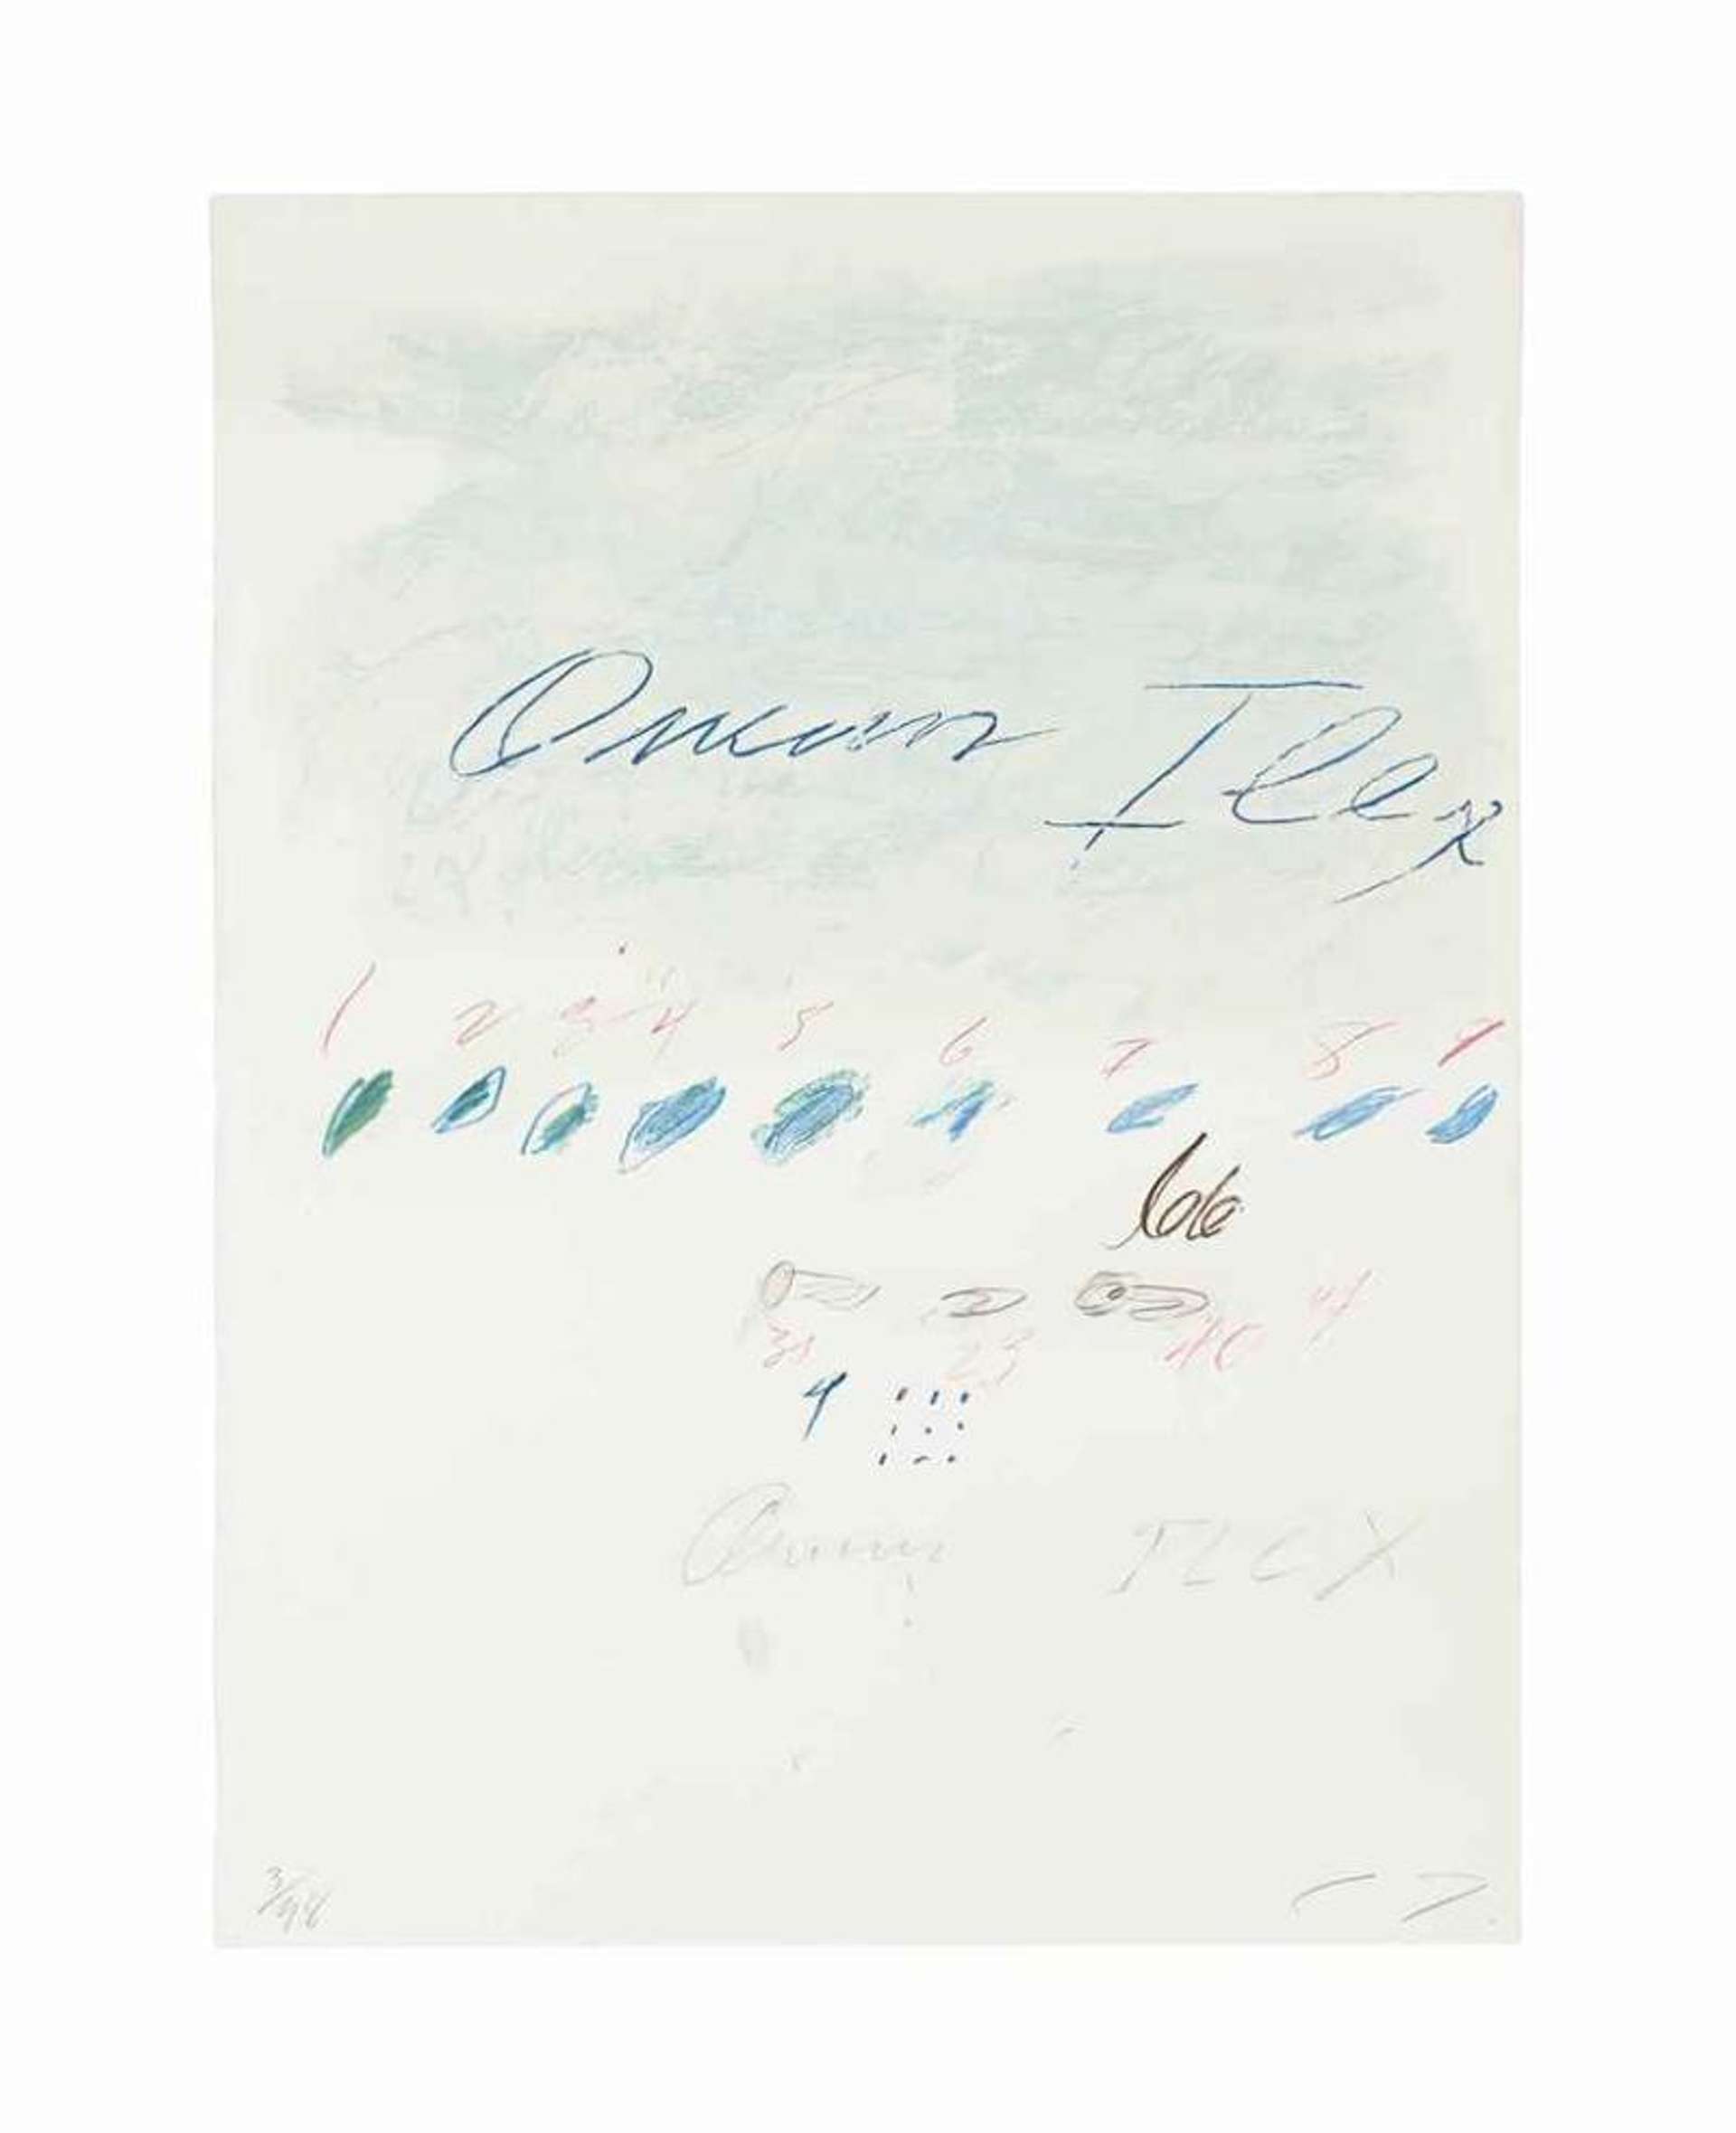 Quercus Ilex - Unsigned Print by Cy Twombly 1975 - MyArtBroker